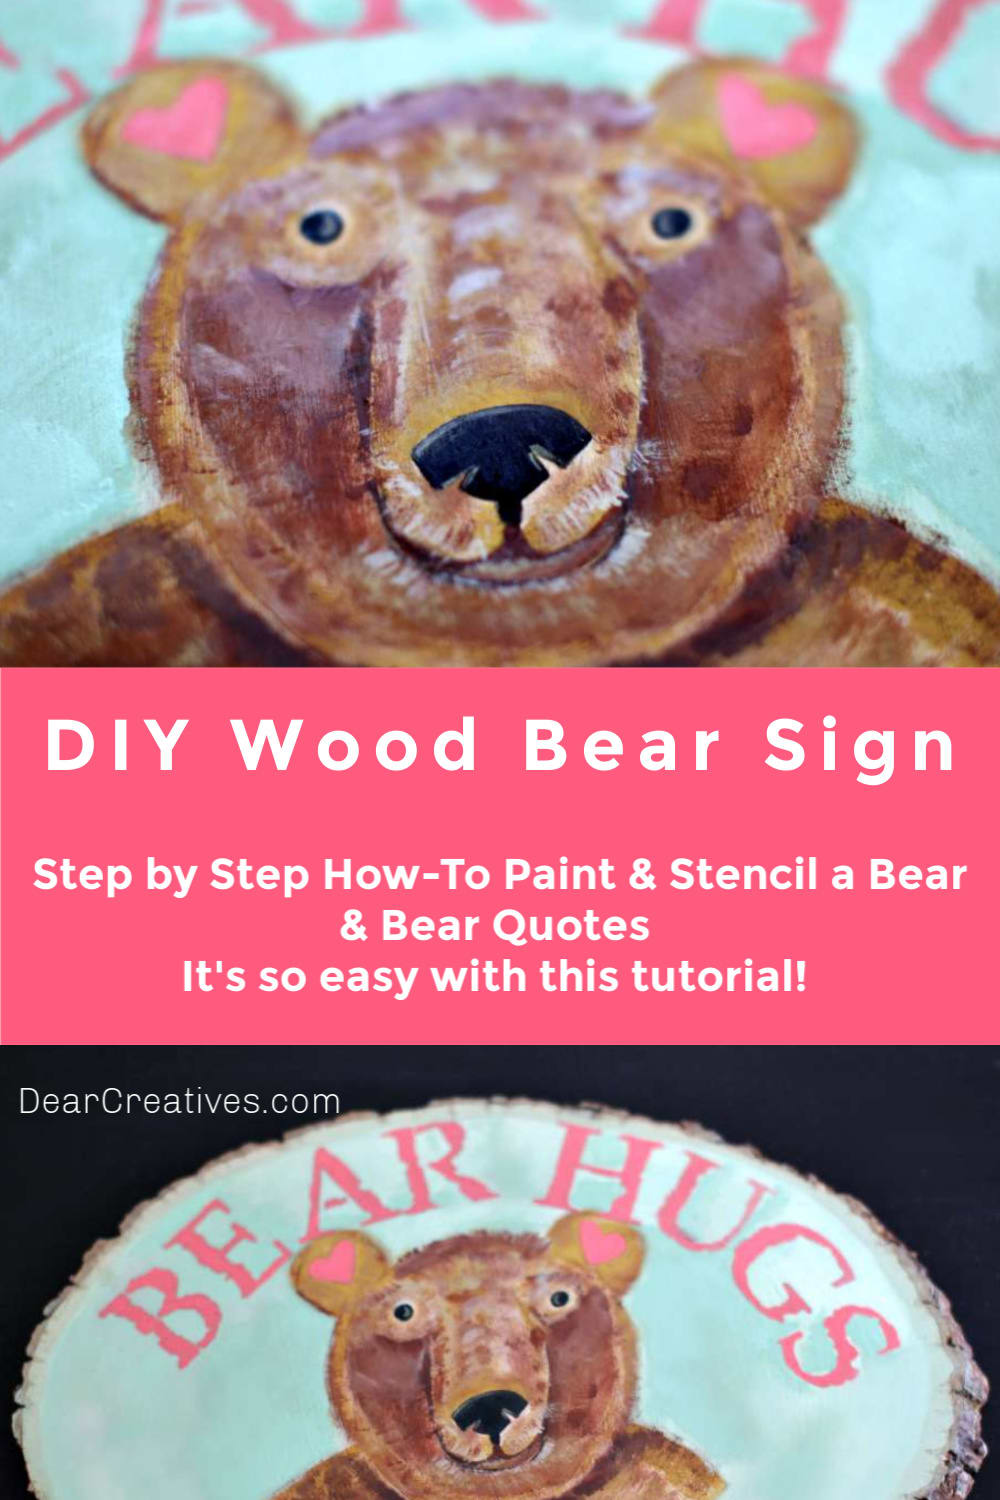 DIY Wood Bear Sign - Step By Step How-To